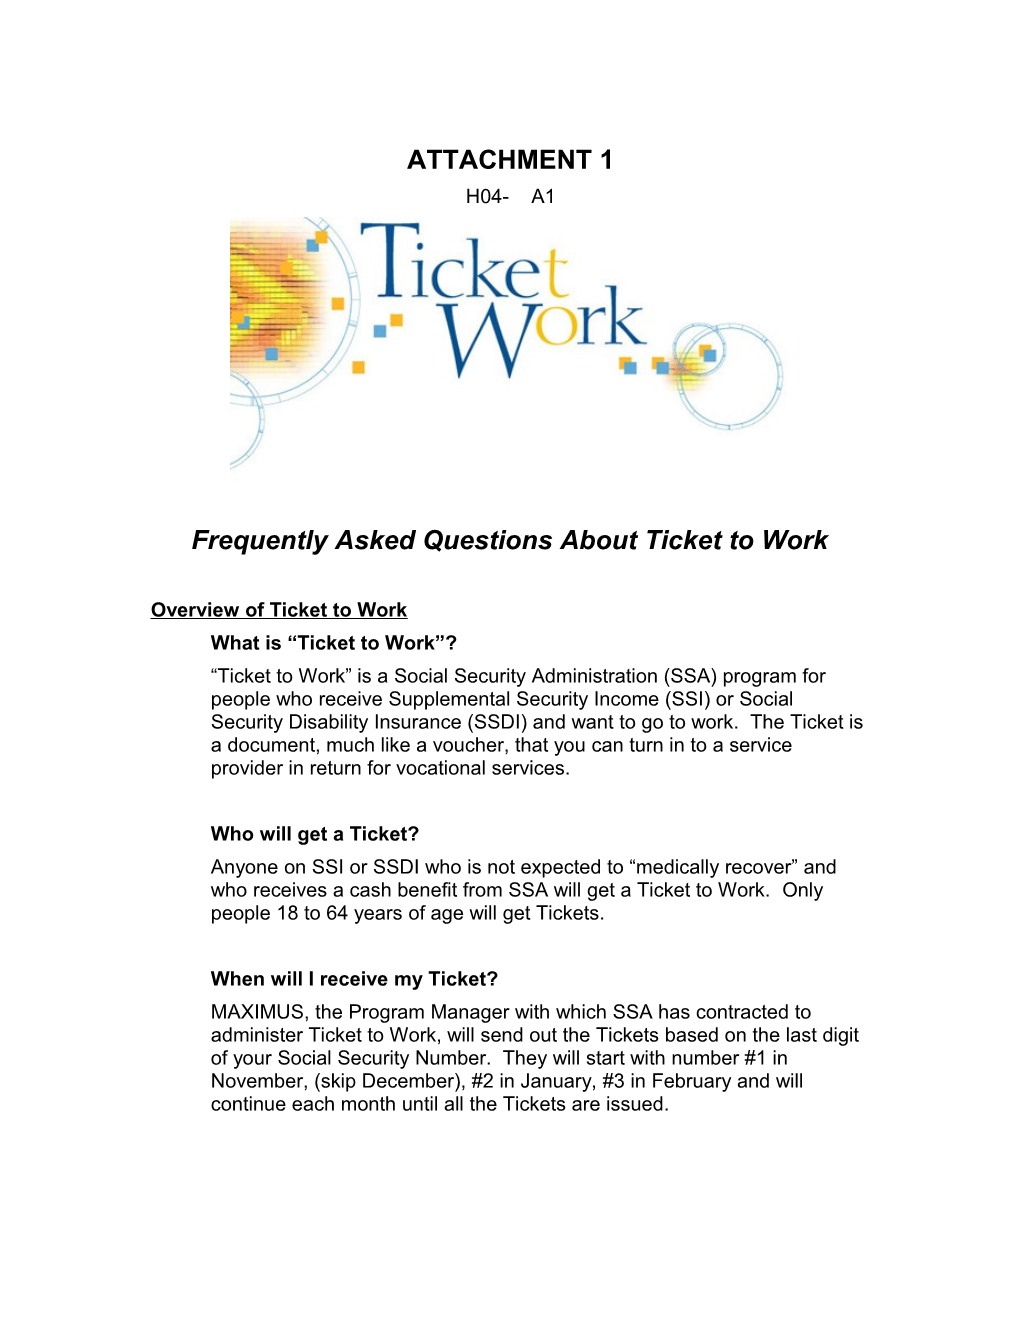 Frequently Asked Questions About Ticket to Work